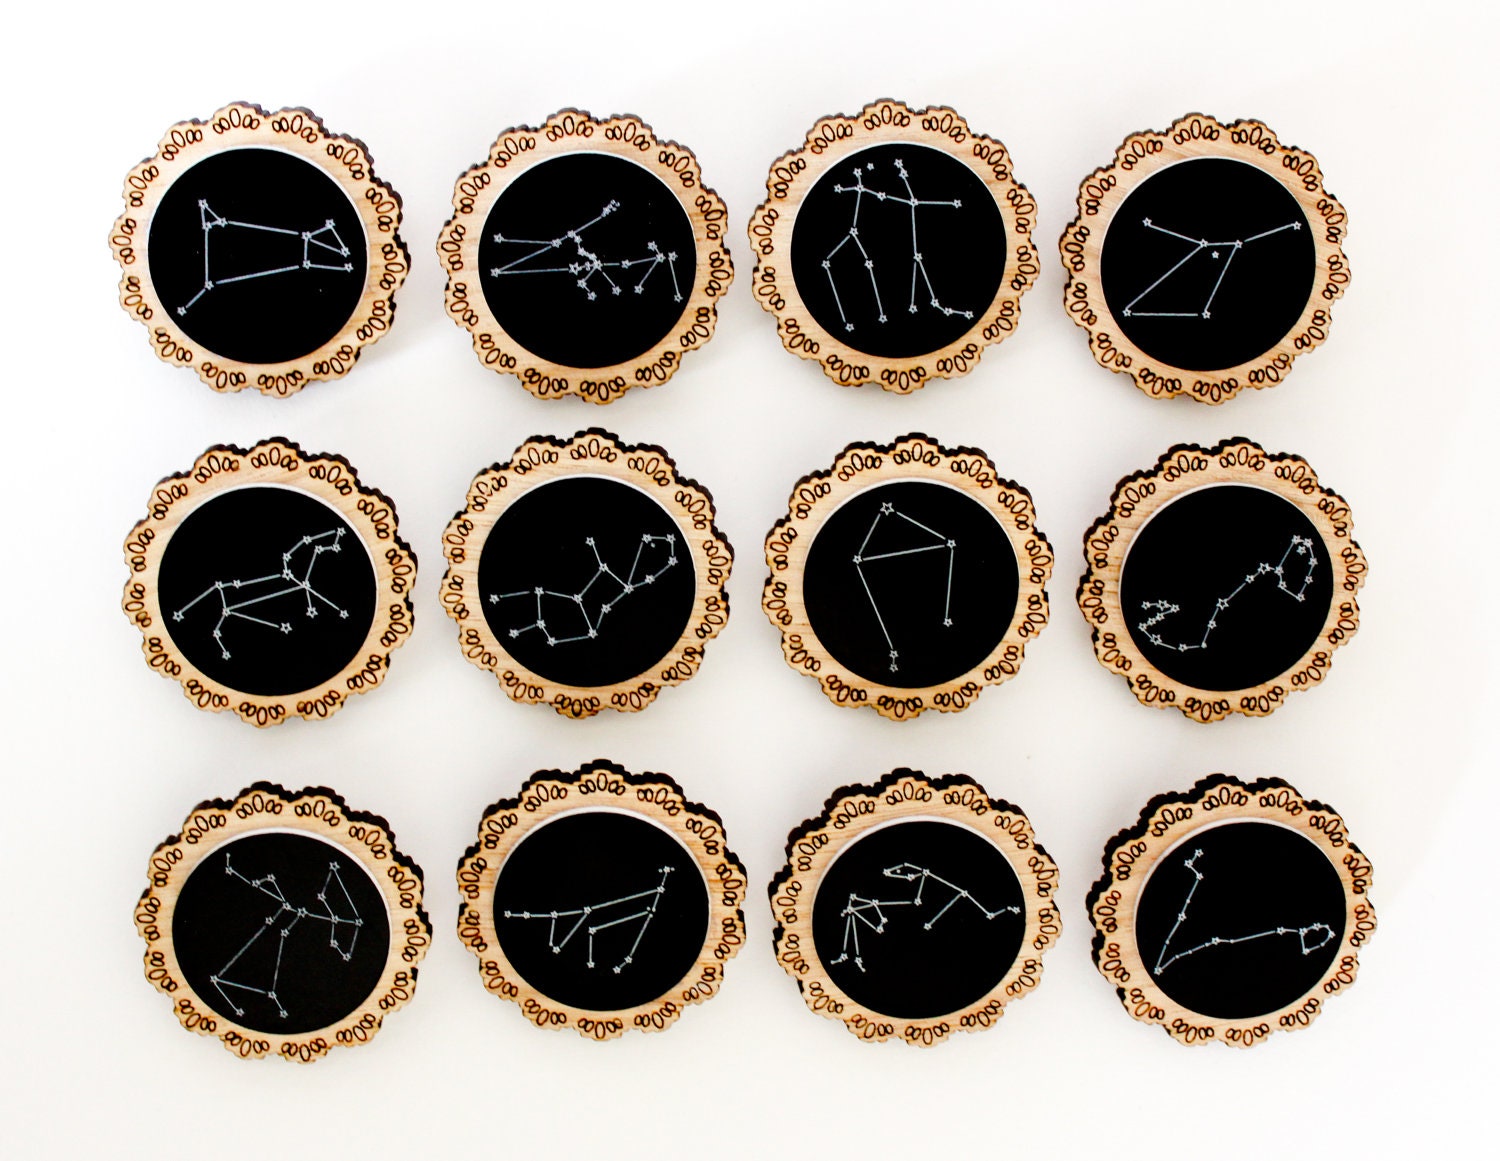 Zodiac Constellation Wooden Brooches "Oh My Stars"